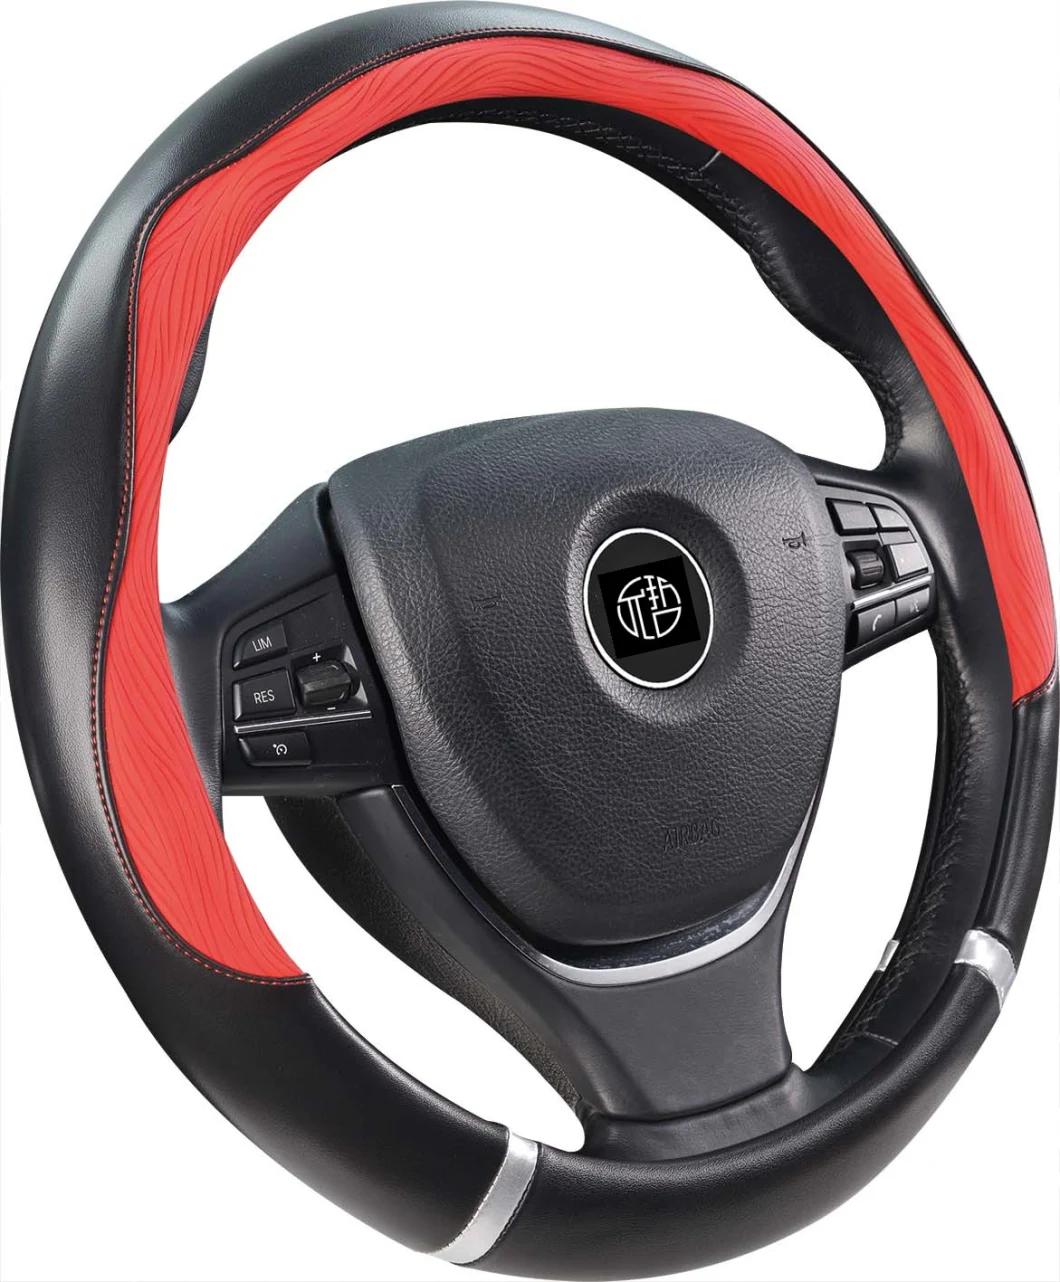 Walmart Hot Selling Item Splicing Faux Leather Wheel Covers for Car